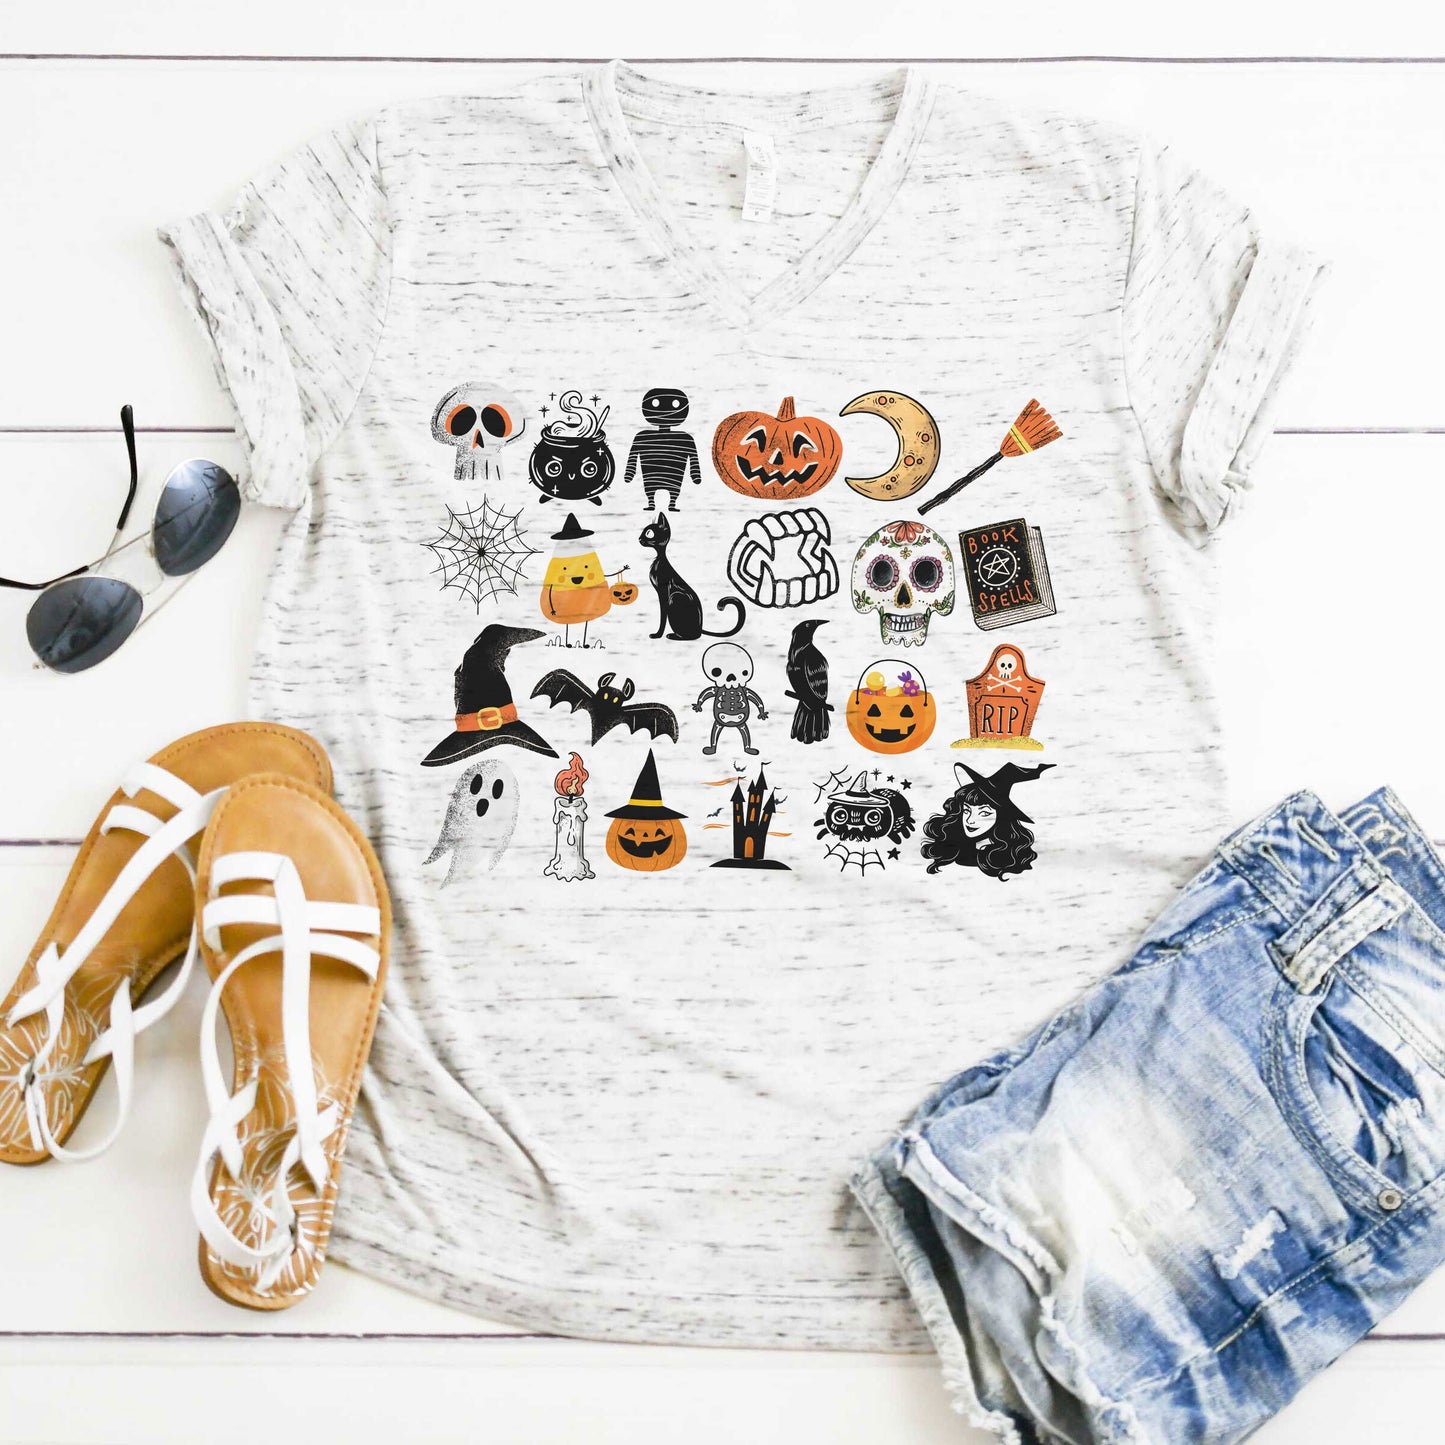 Its the Little Things | Happy Halloween | UNISEX V-Neck T-Shirt